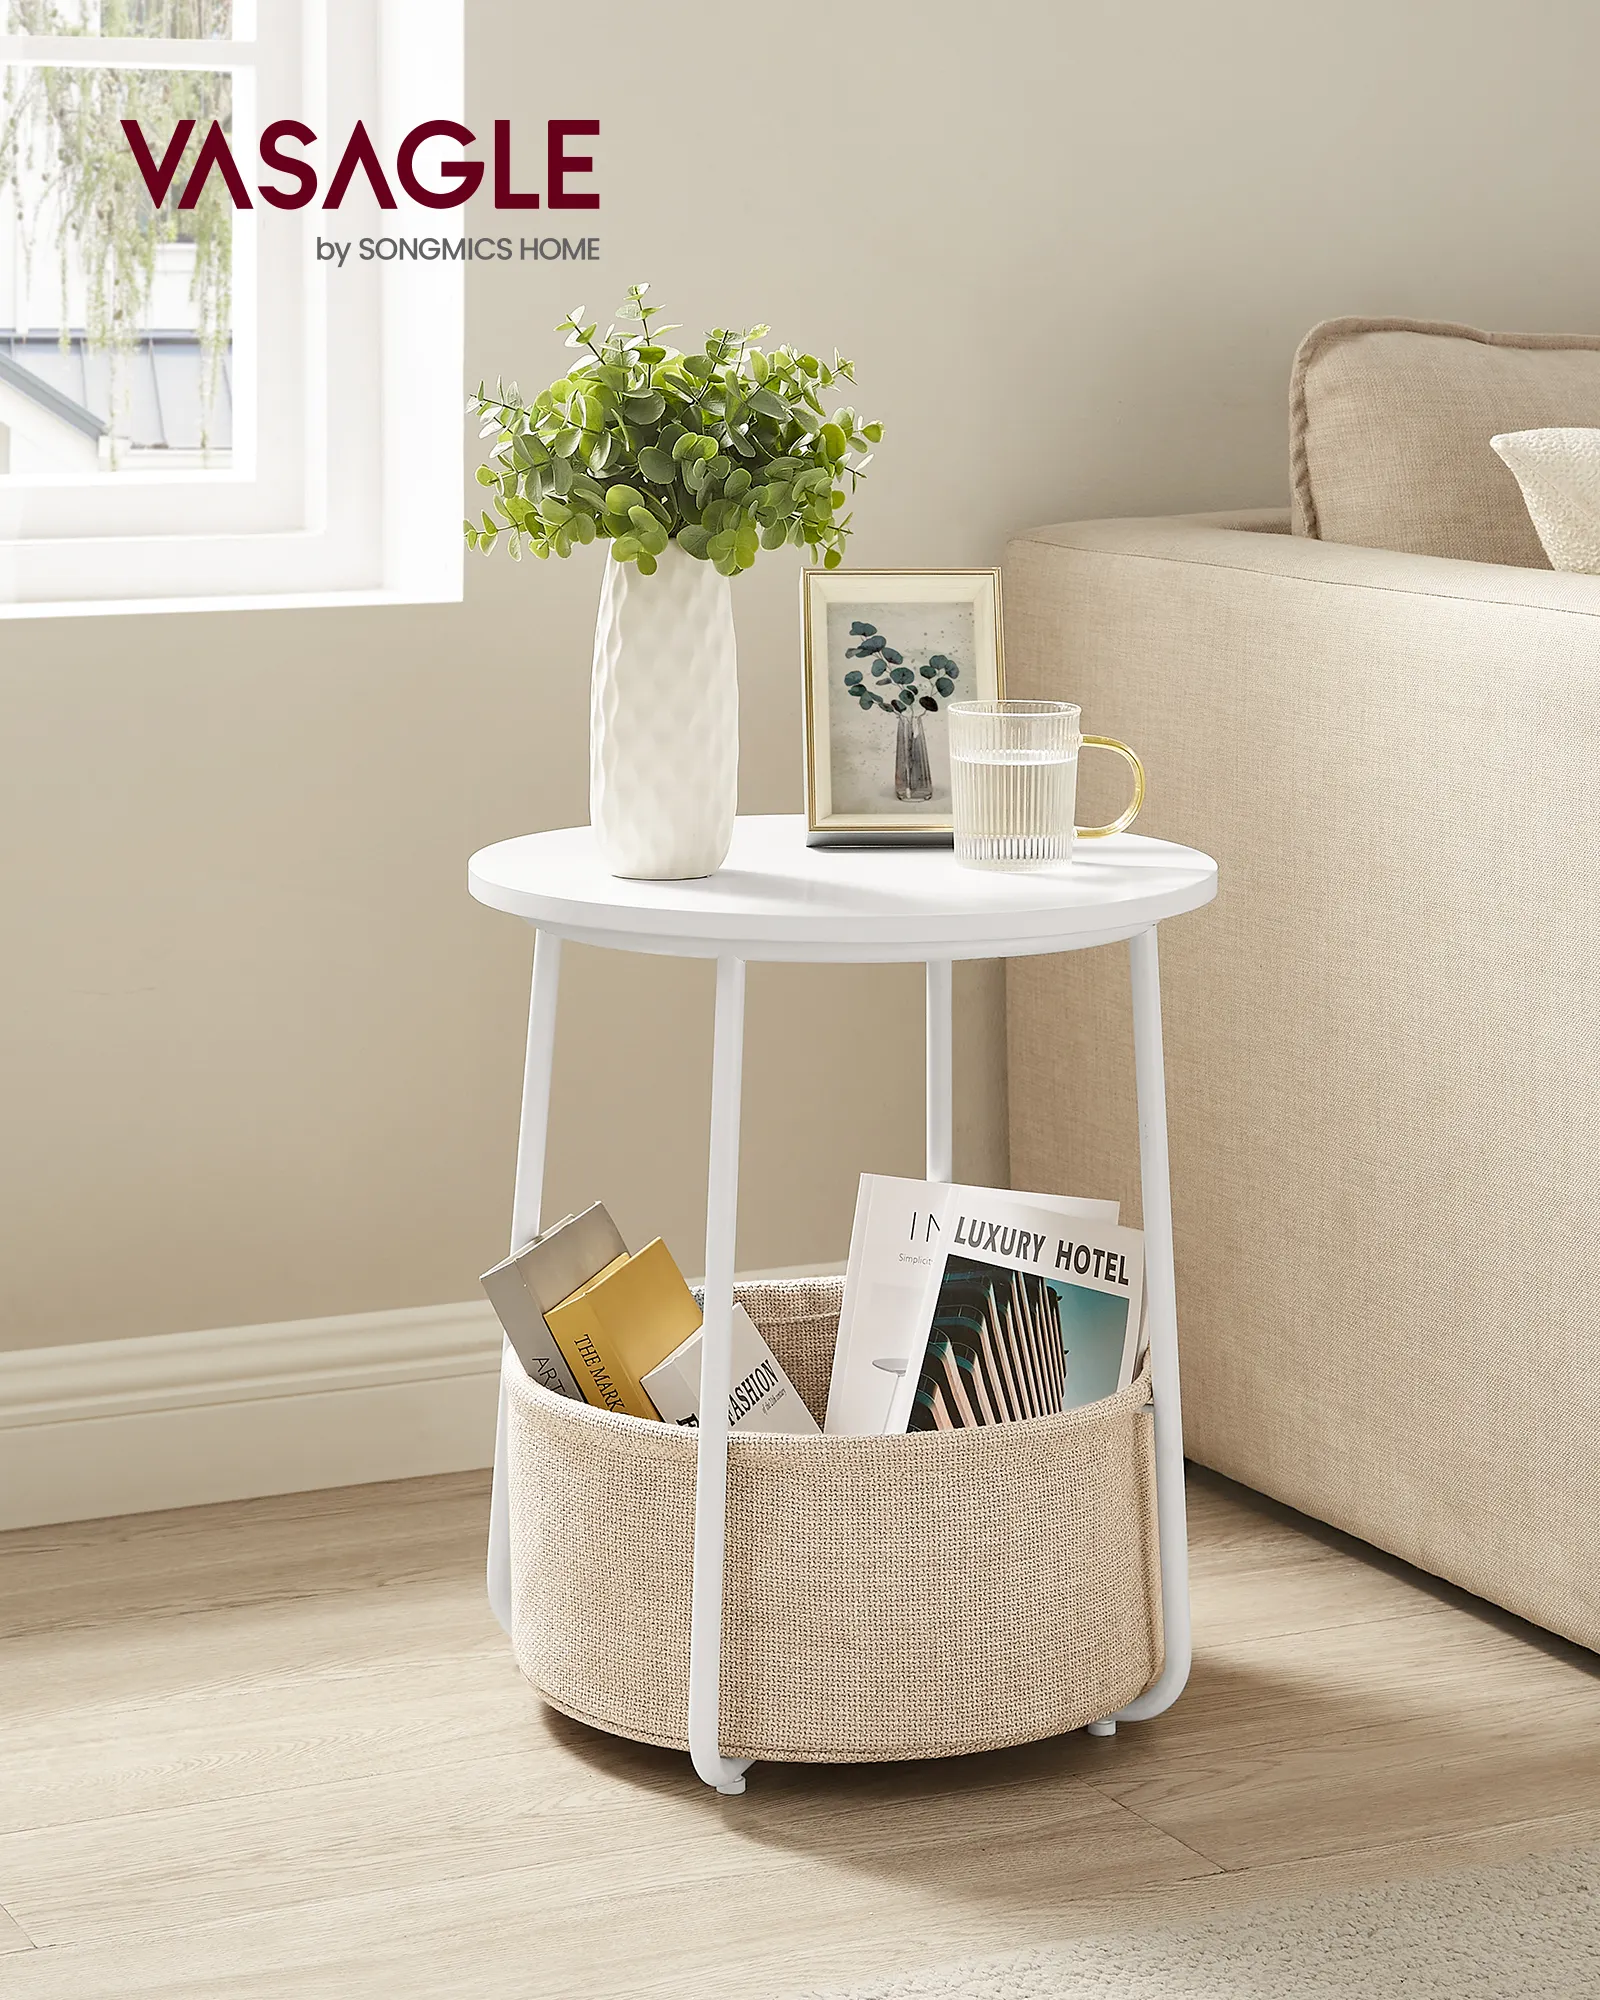 VASAGLE small round side table Living room table with fabric basket multi-function coffee table with storage